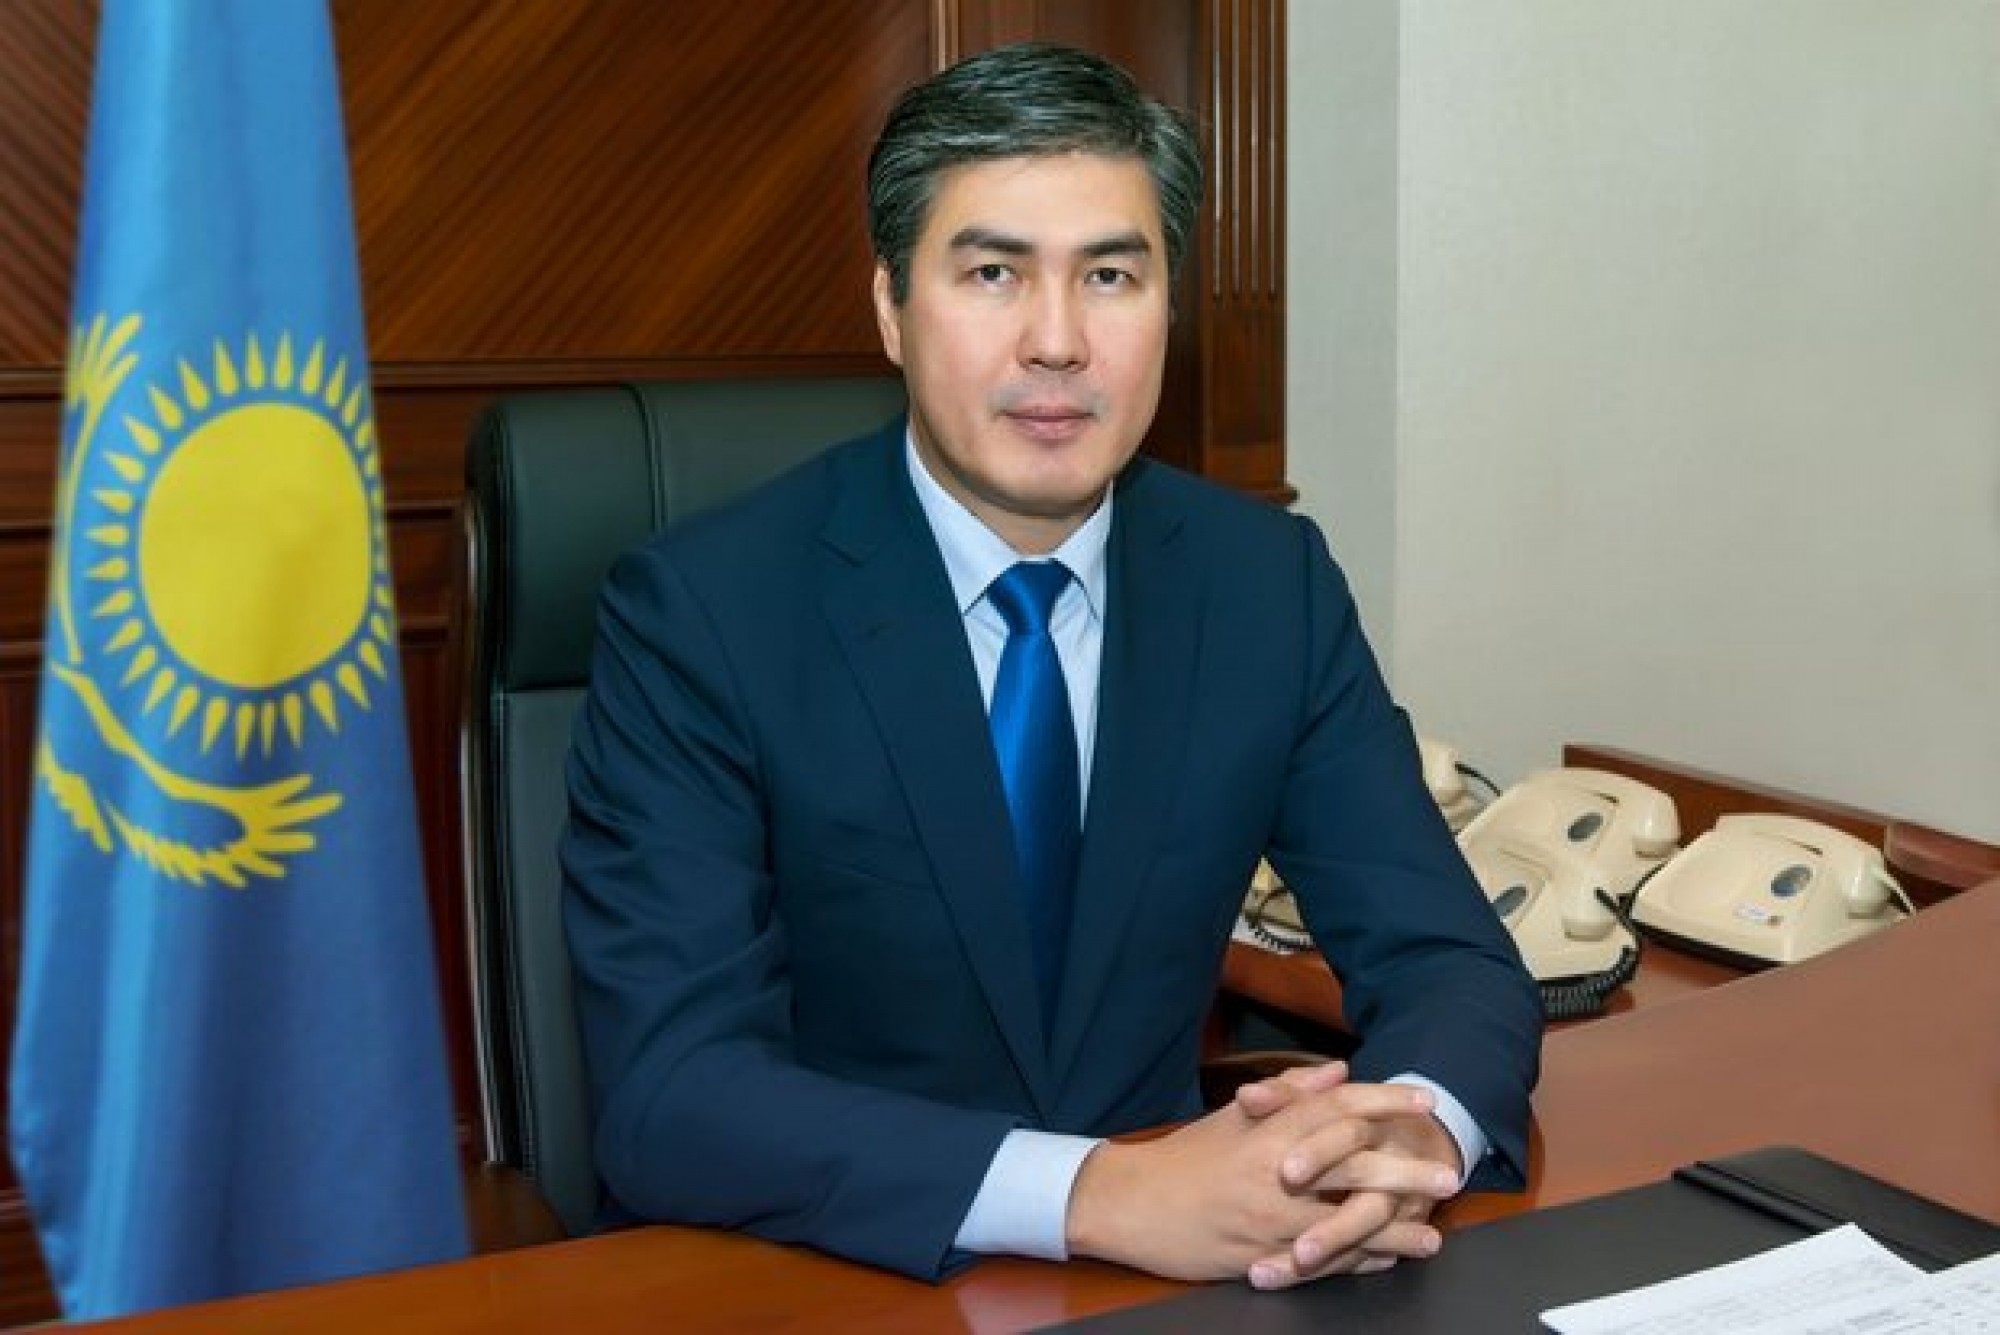 Asset Issekeshev appointed as Head of Presidential Administration